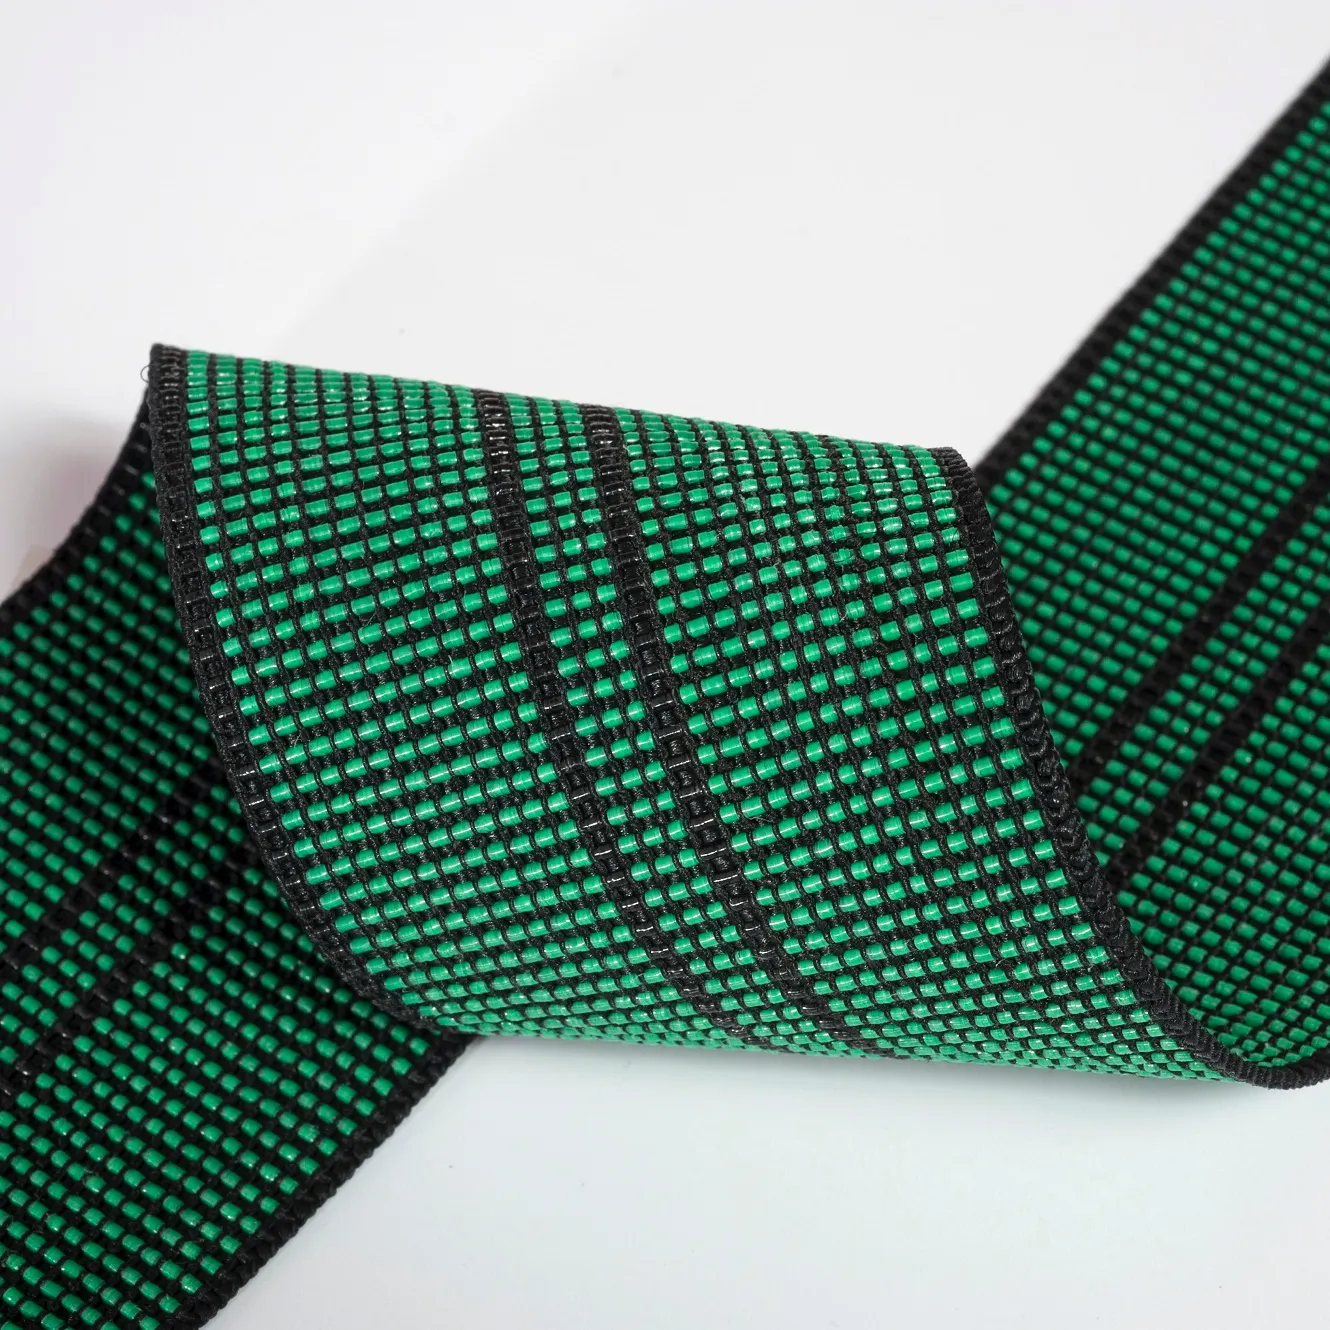 ELASTIC WEBBING 60MM WIDE 2LINE GREEN COLOUR %60 STRETCH FOR FURNITURE